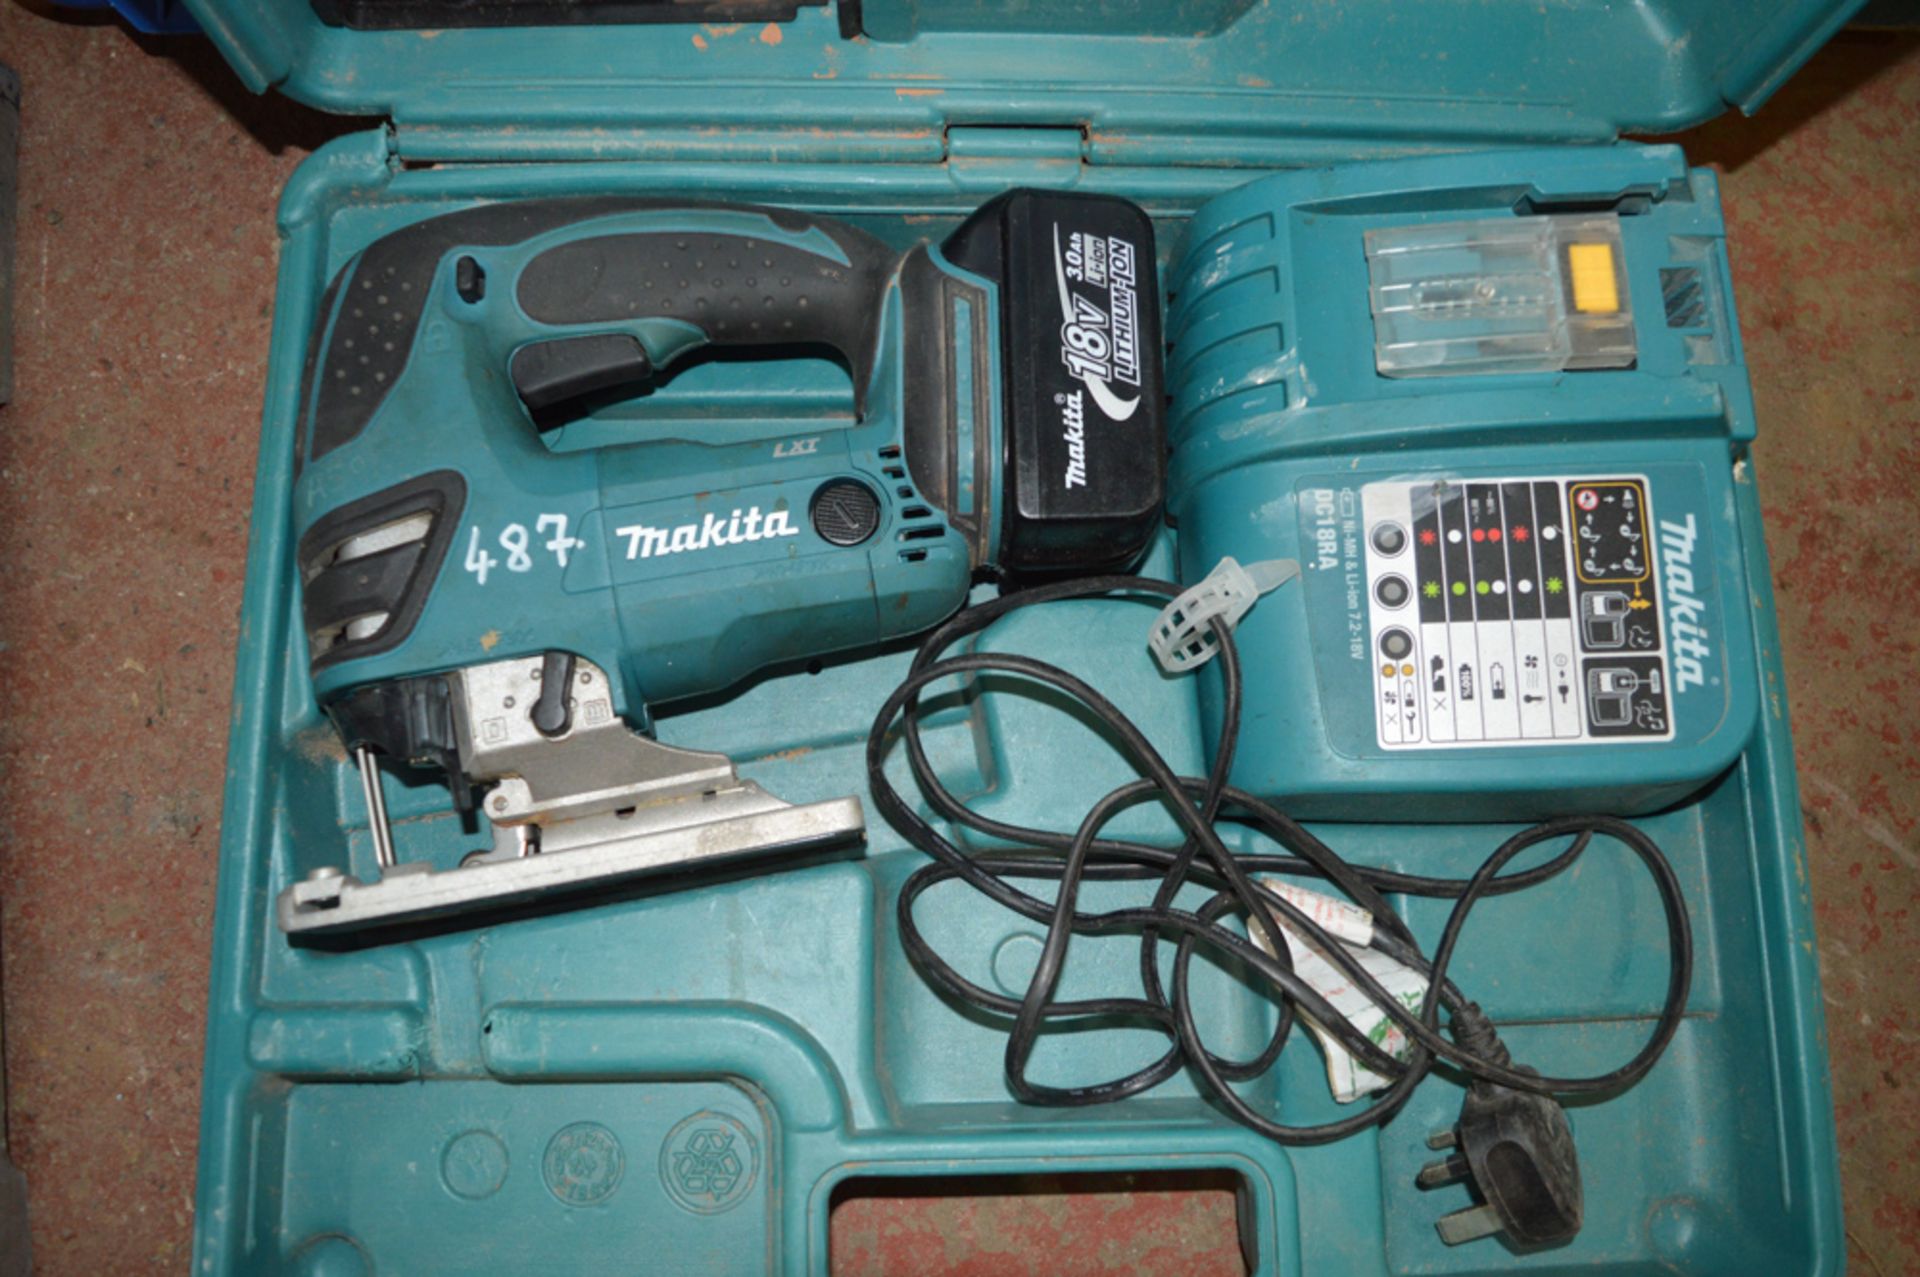 Makita 18v cordless jigsaw c/w battery, charger & carry case BOV180